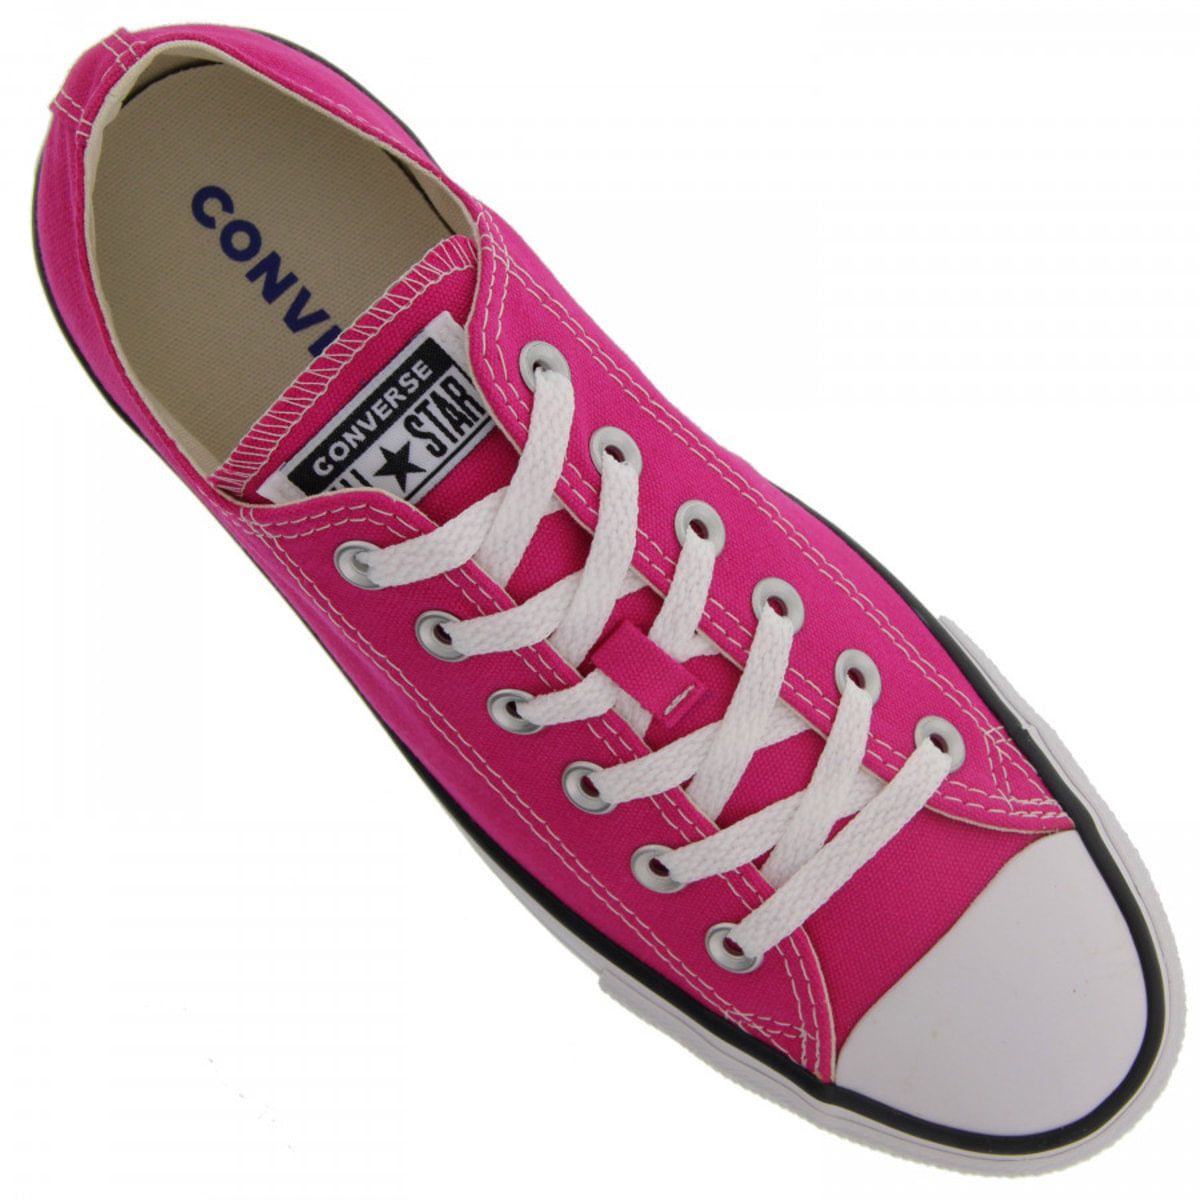 all star rosa pink